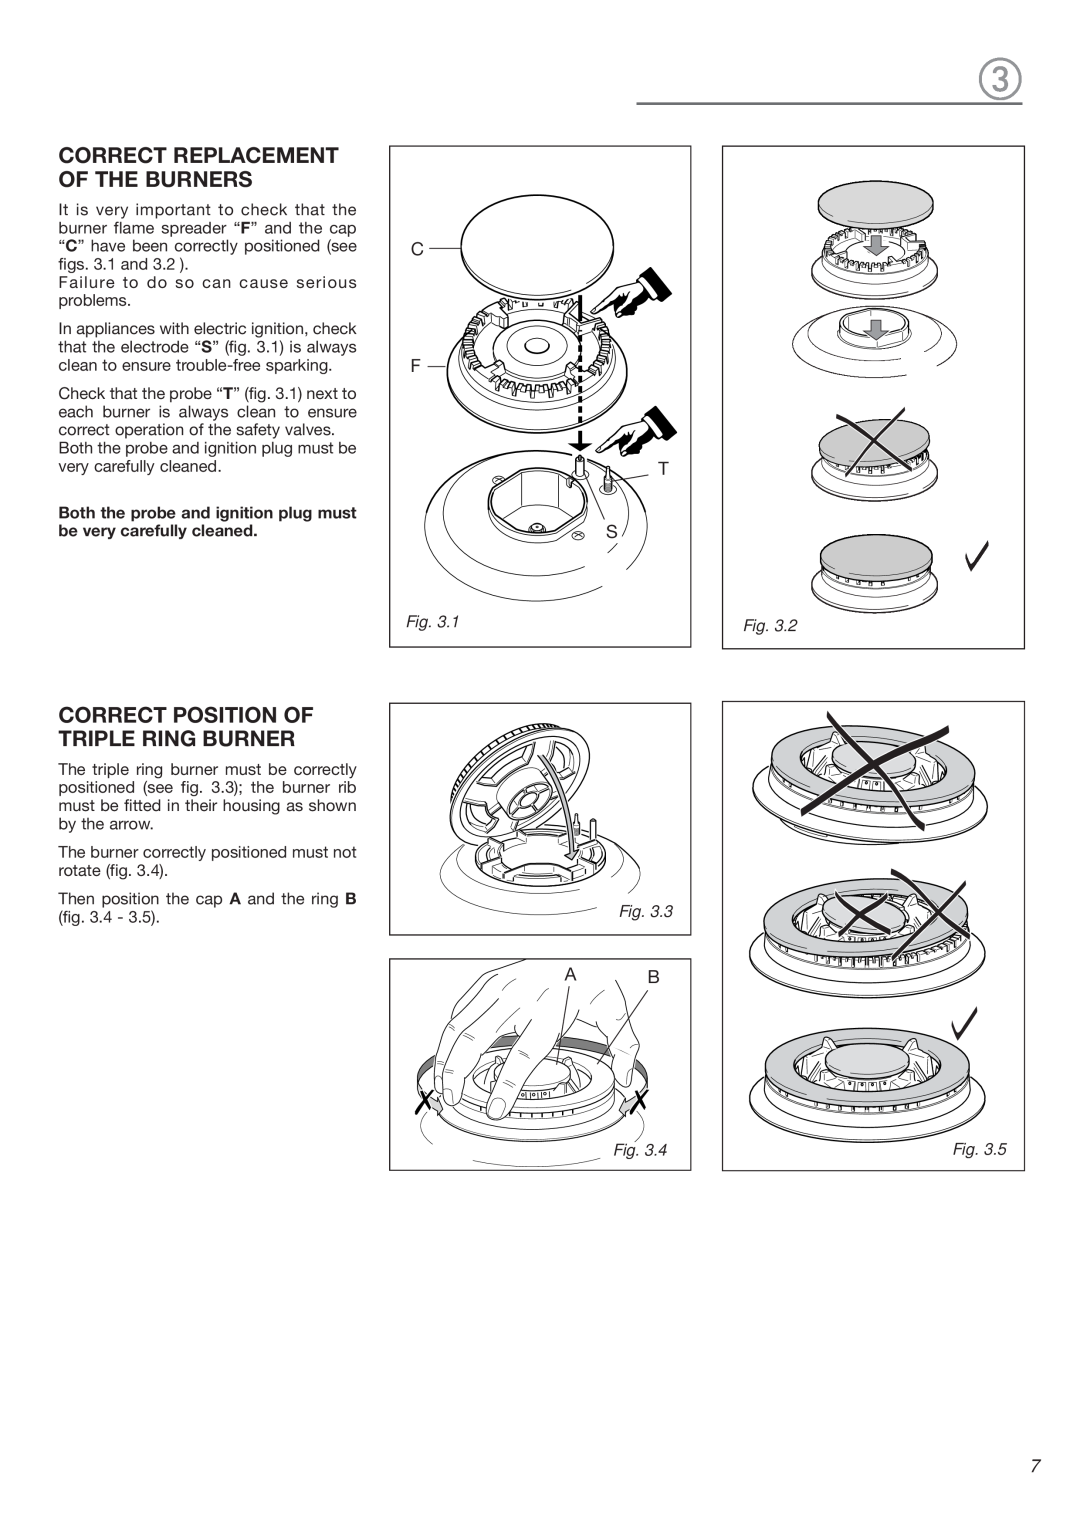 Verona VEGCT424F warranty Correct Replacement Of The Burners, Correct Position Of Triple Ring Burner 